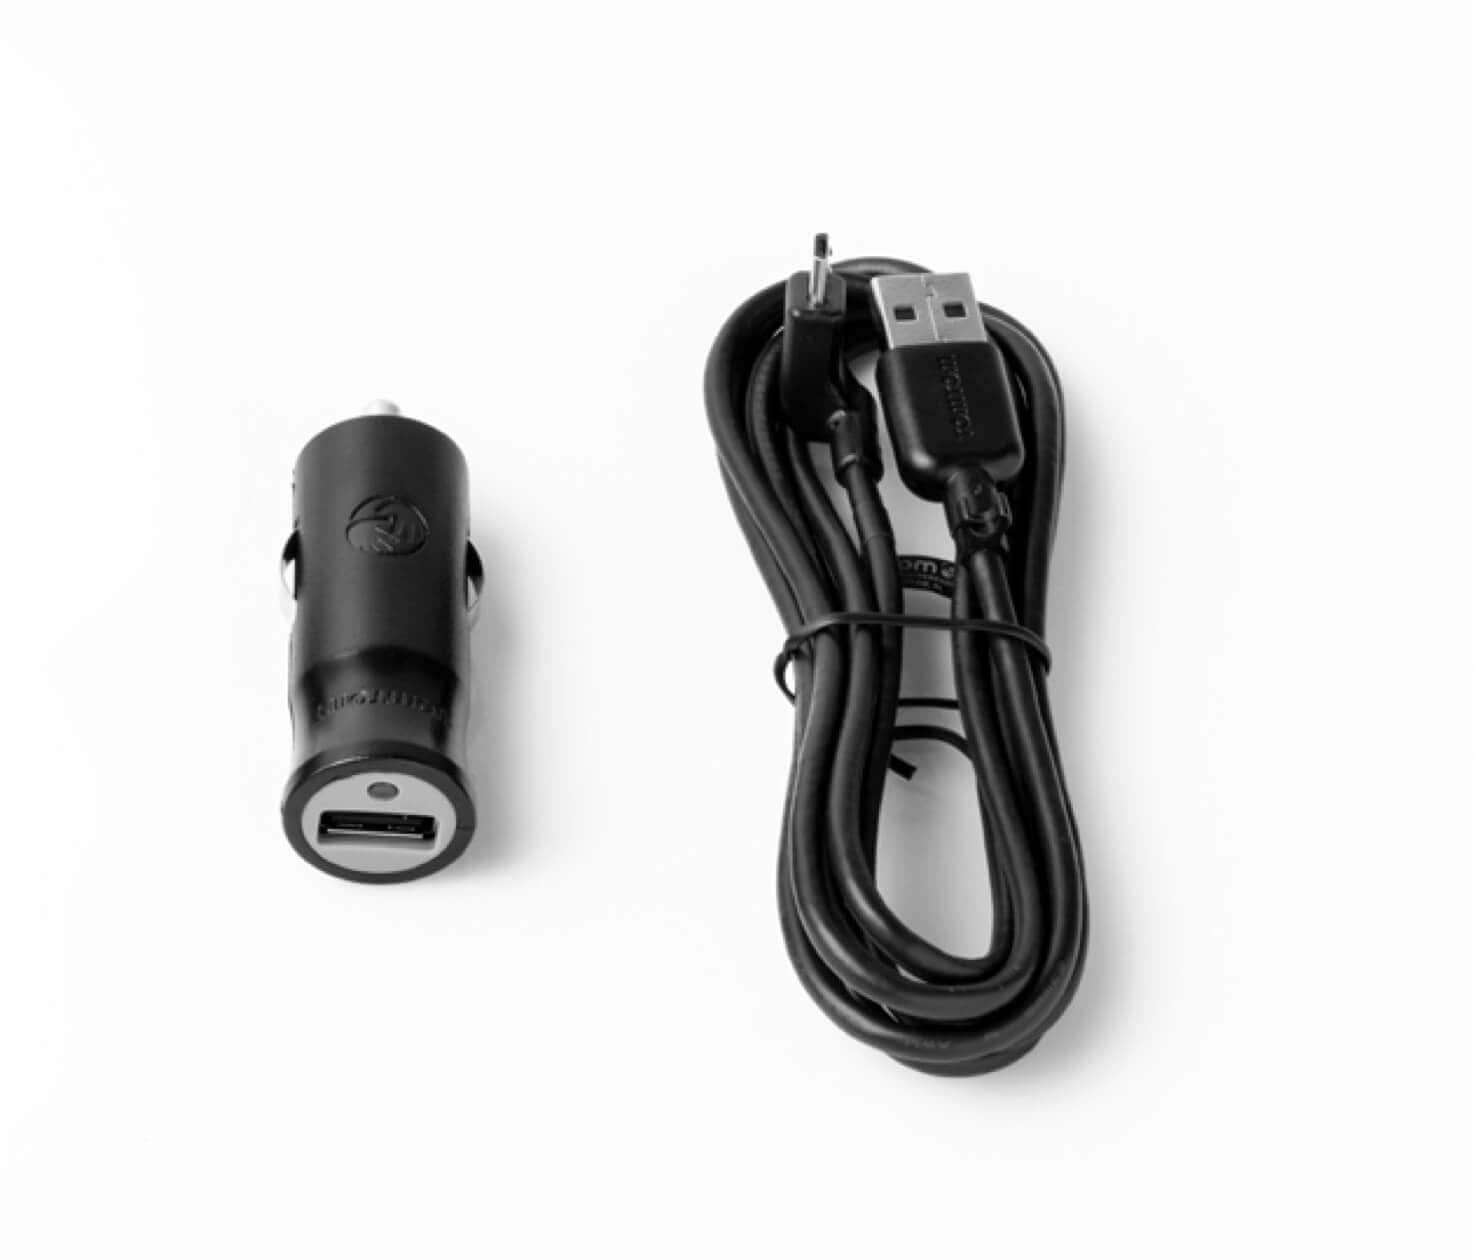 In Car Charger 1.2Amp Right Angle MINI USB Cable for Tomtom GO 750 Sat Nav